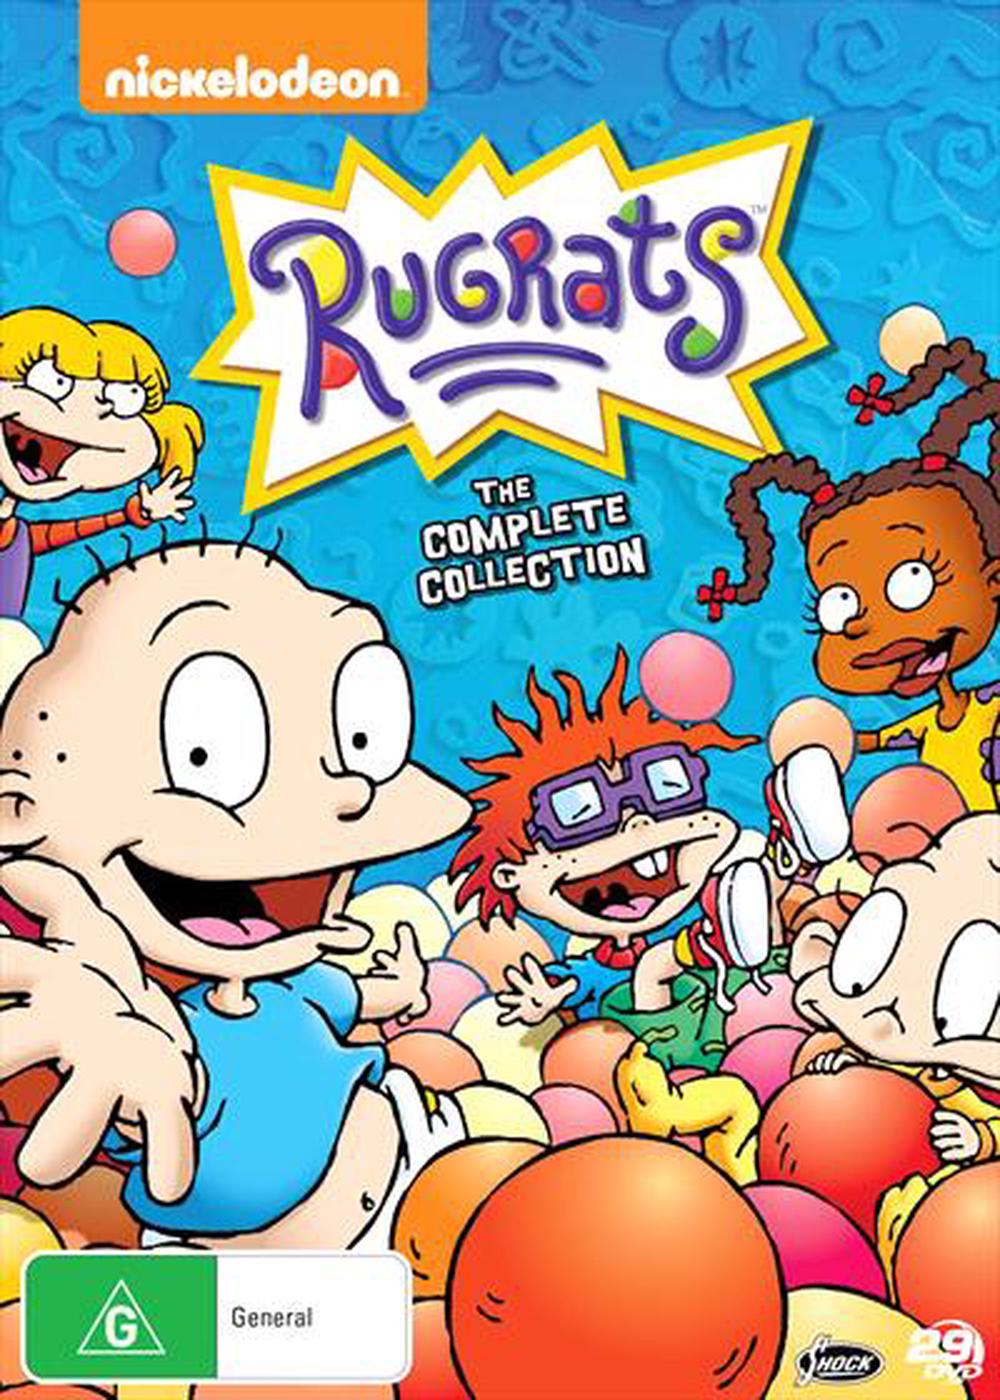 Rugrats Series Collection Dvd Buy Online At The Nile